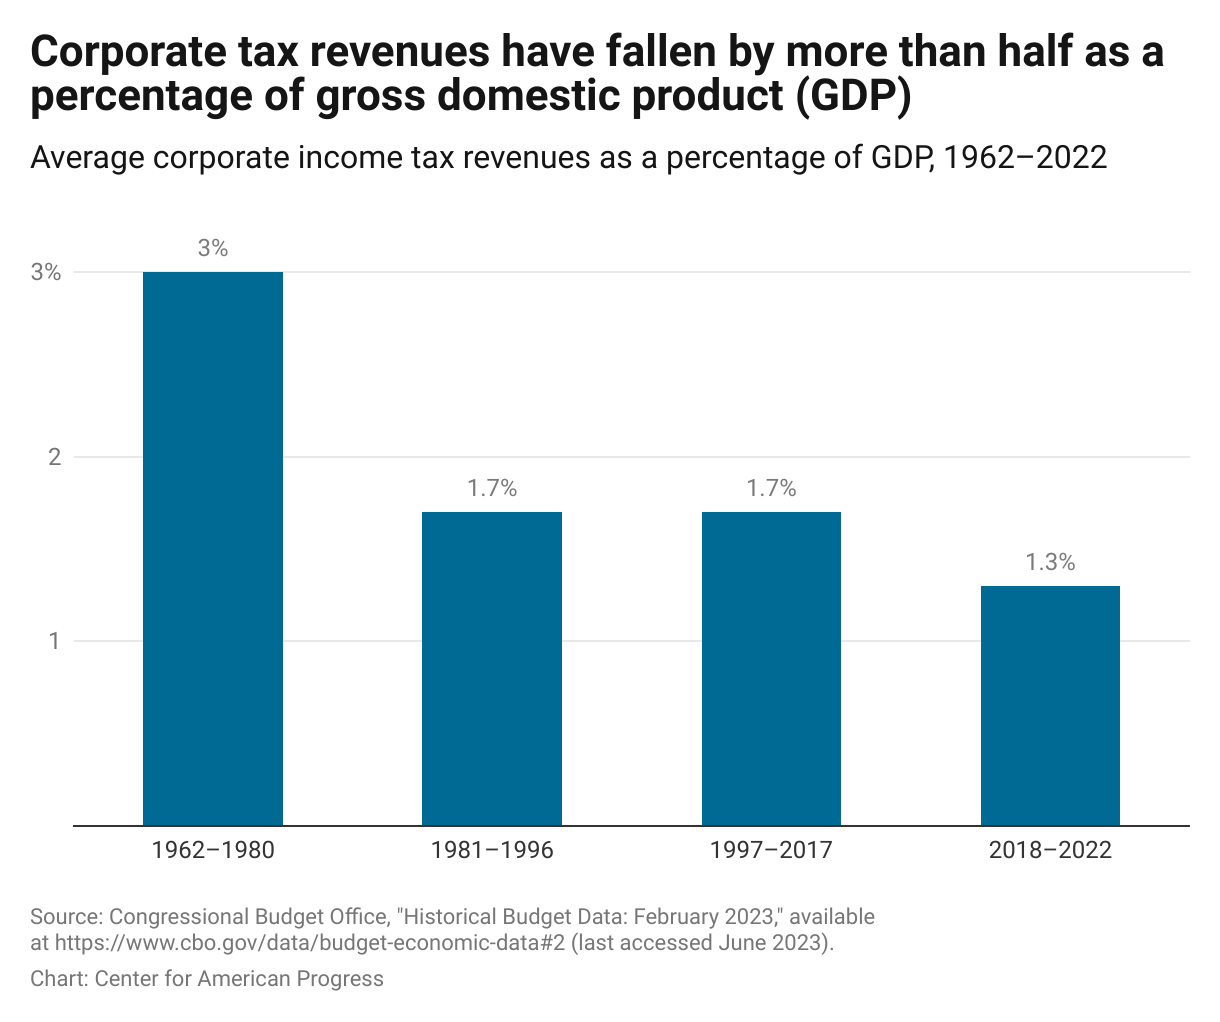 Bar graph showing that corporate tax revenues as a percentage of GDP have fallen by more than half since the 1960s and 1970s.